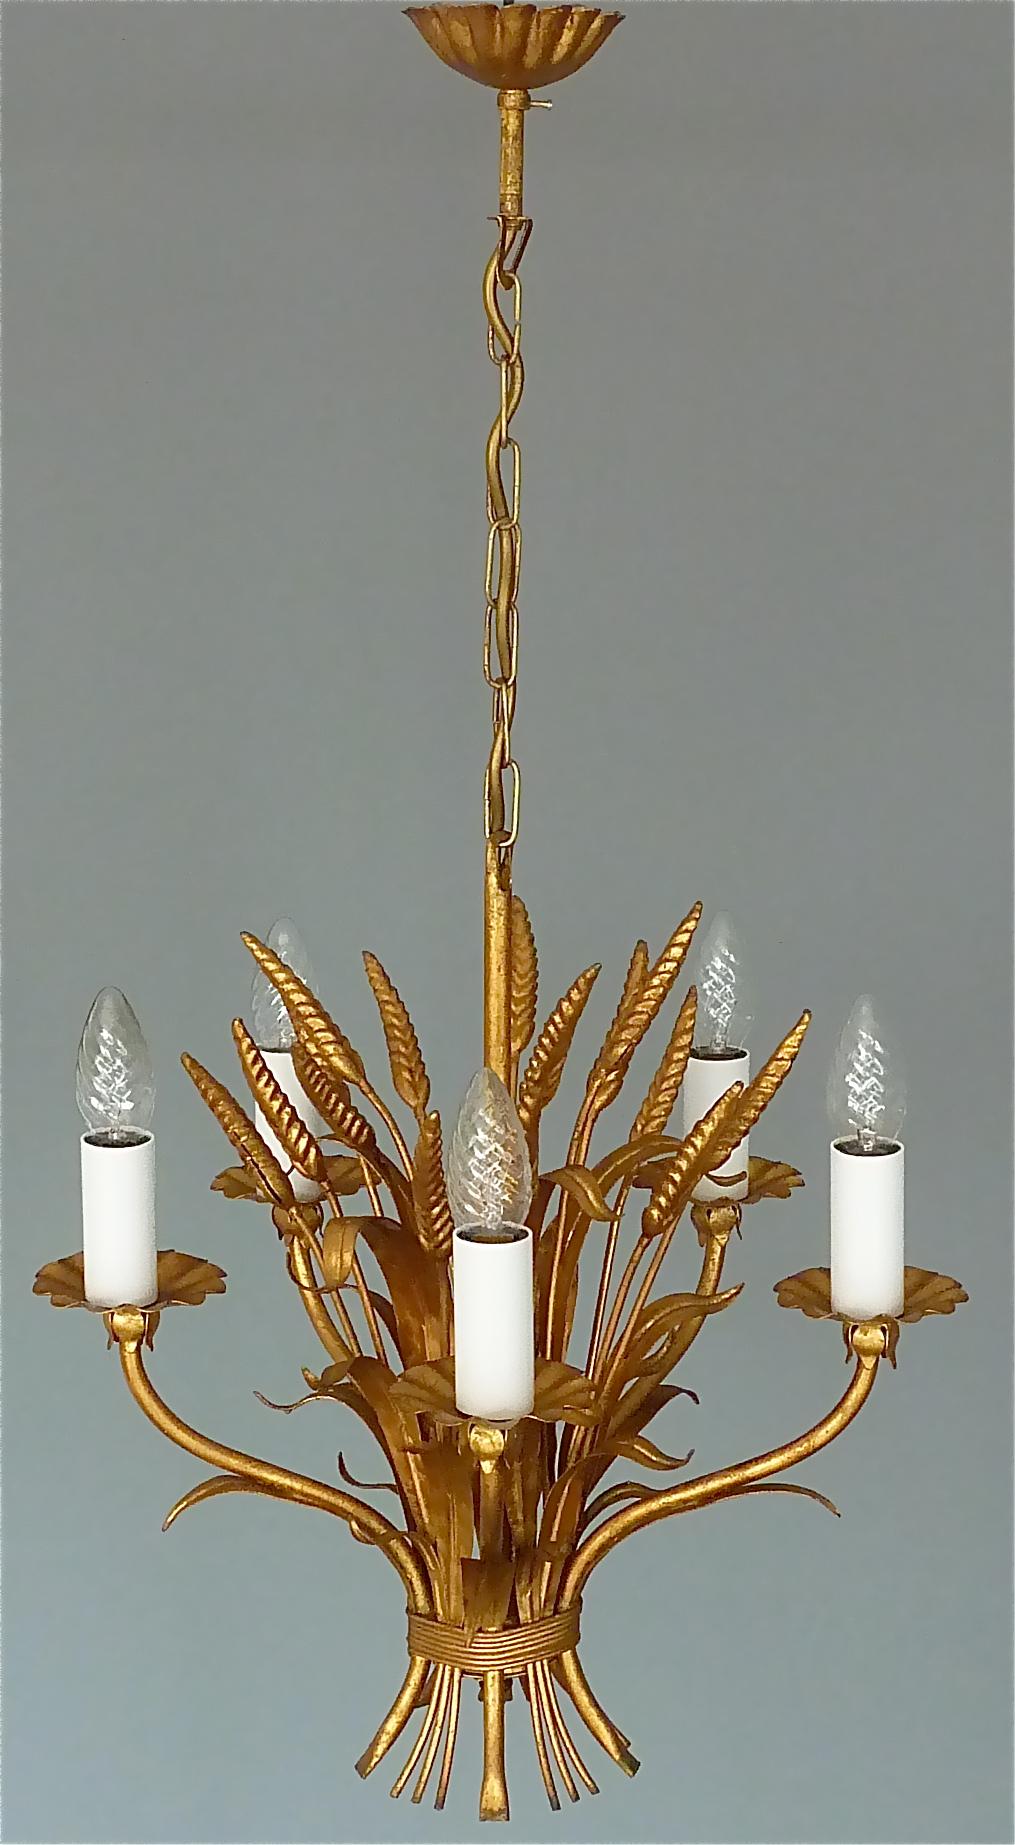 Fabulous Hollywood Regency “Coco Chanel“ style sheaf of wheat five-light gilt metal chandelier made in Italy, circa 1960-1970 with attribution to Hans Kögl. Coco Chanel had used this sheaf of wheat type as a sculptural side table in her elegant